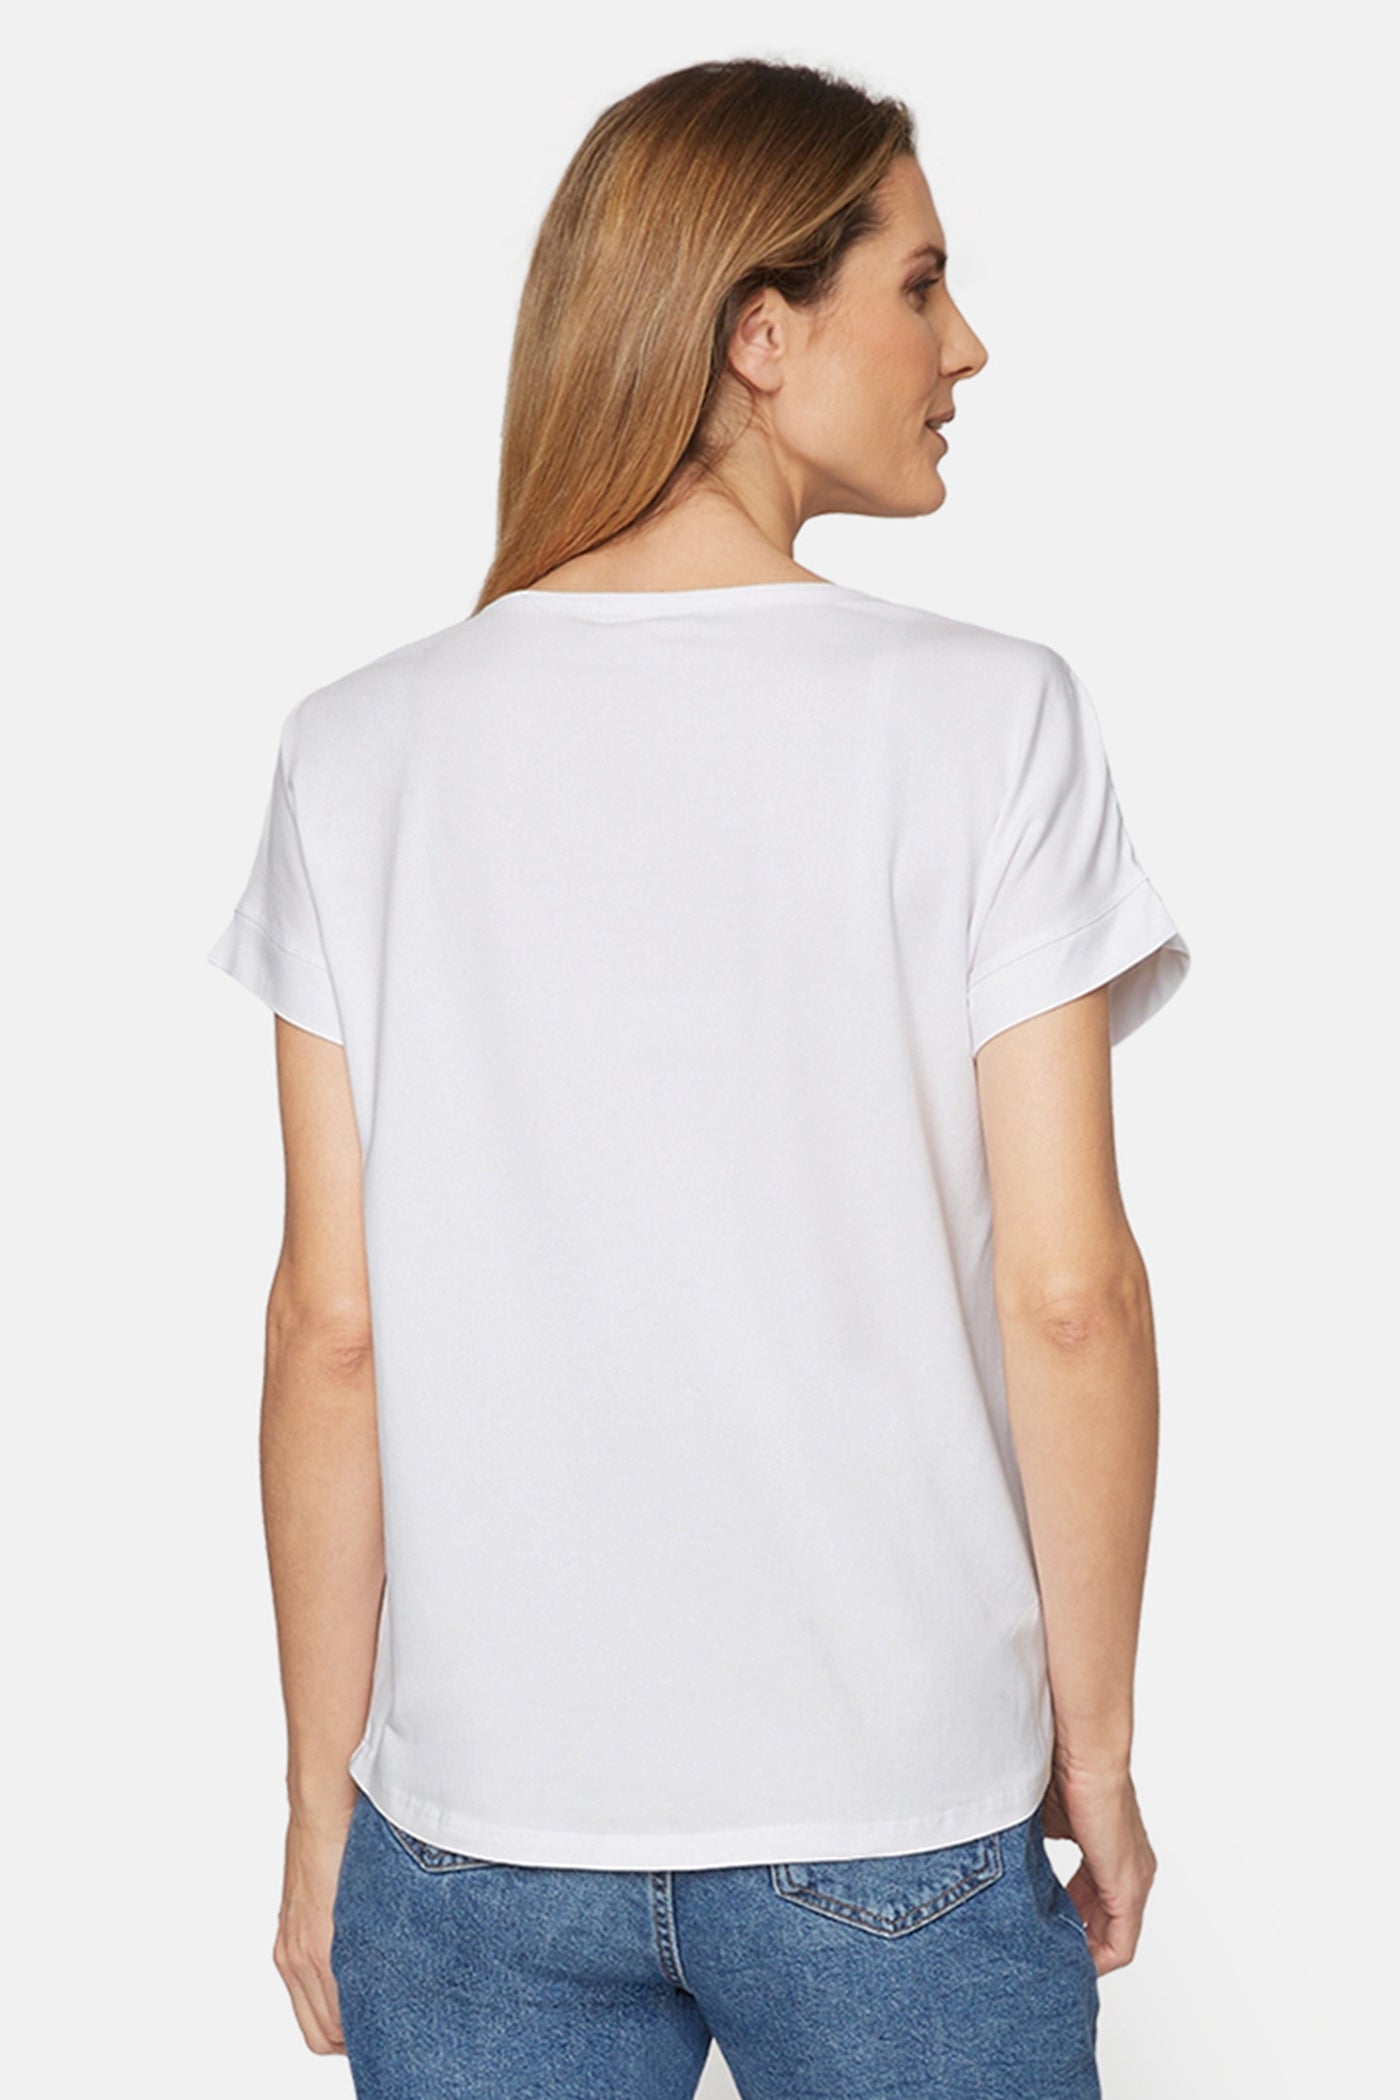 White T-shirt with Print